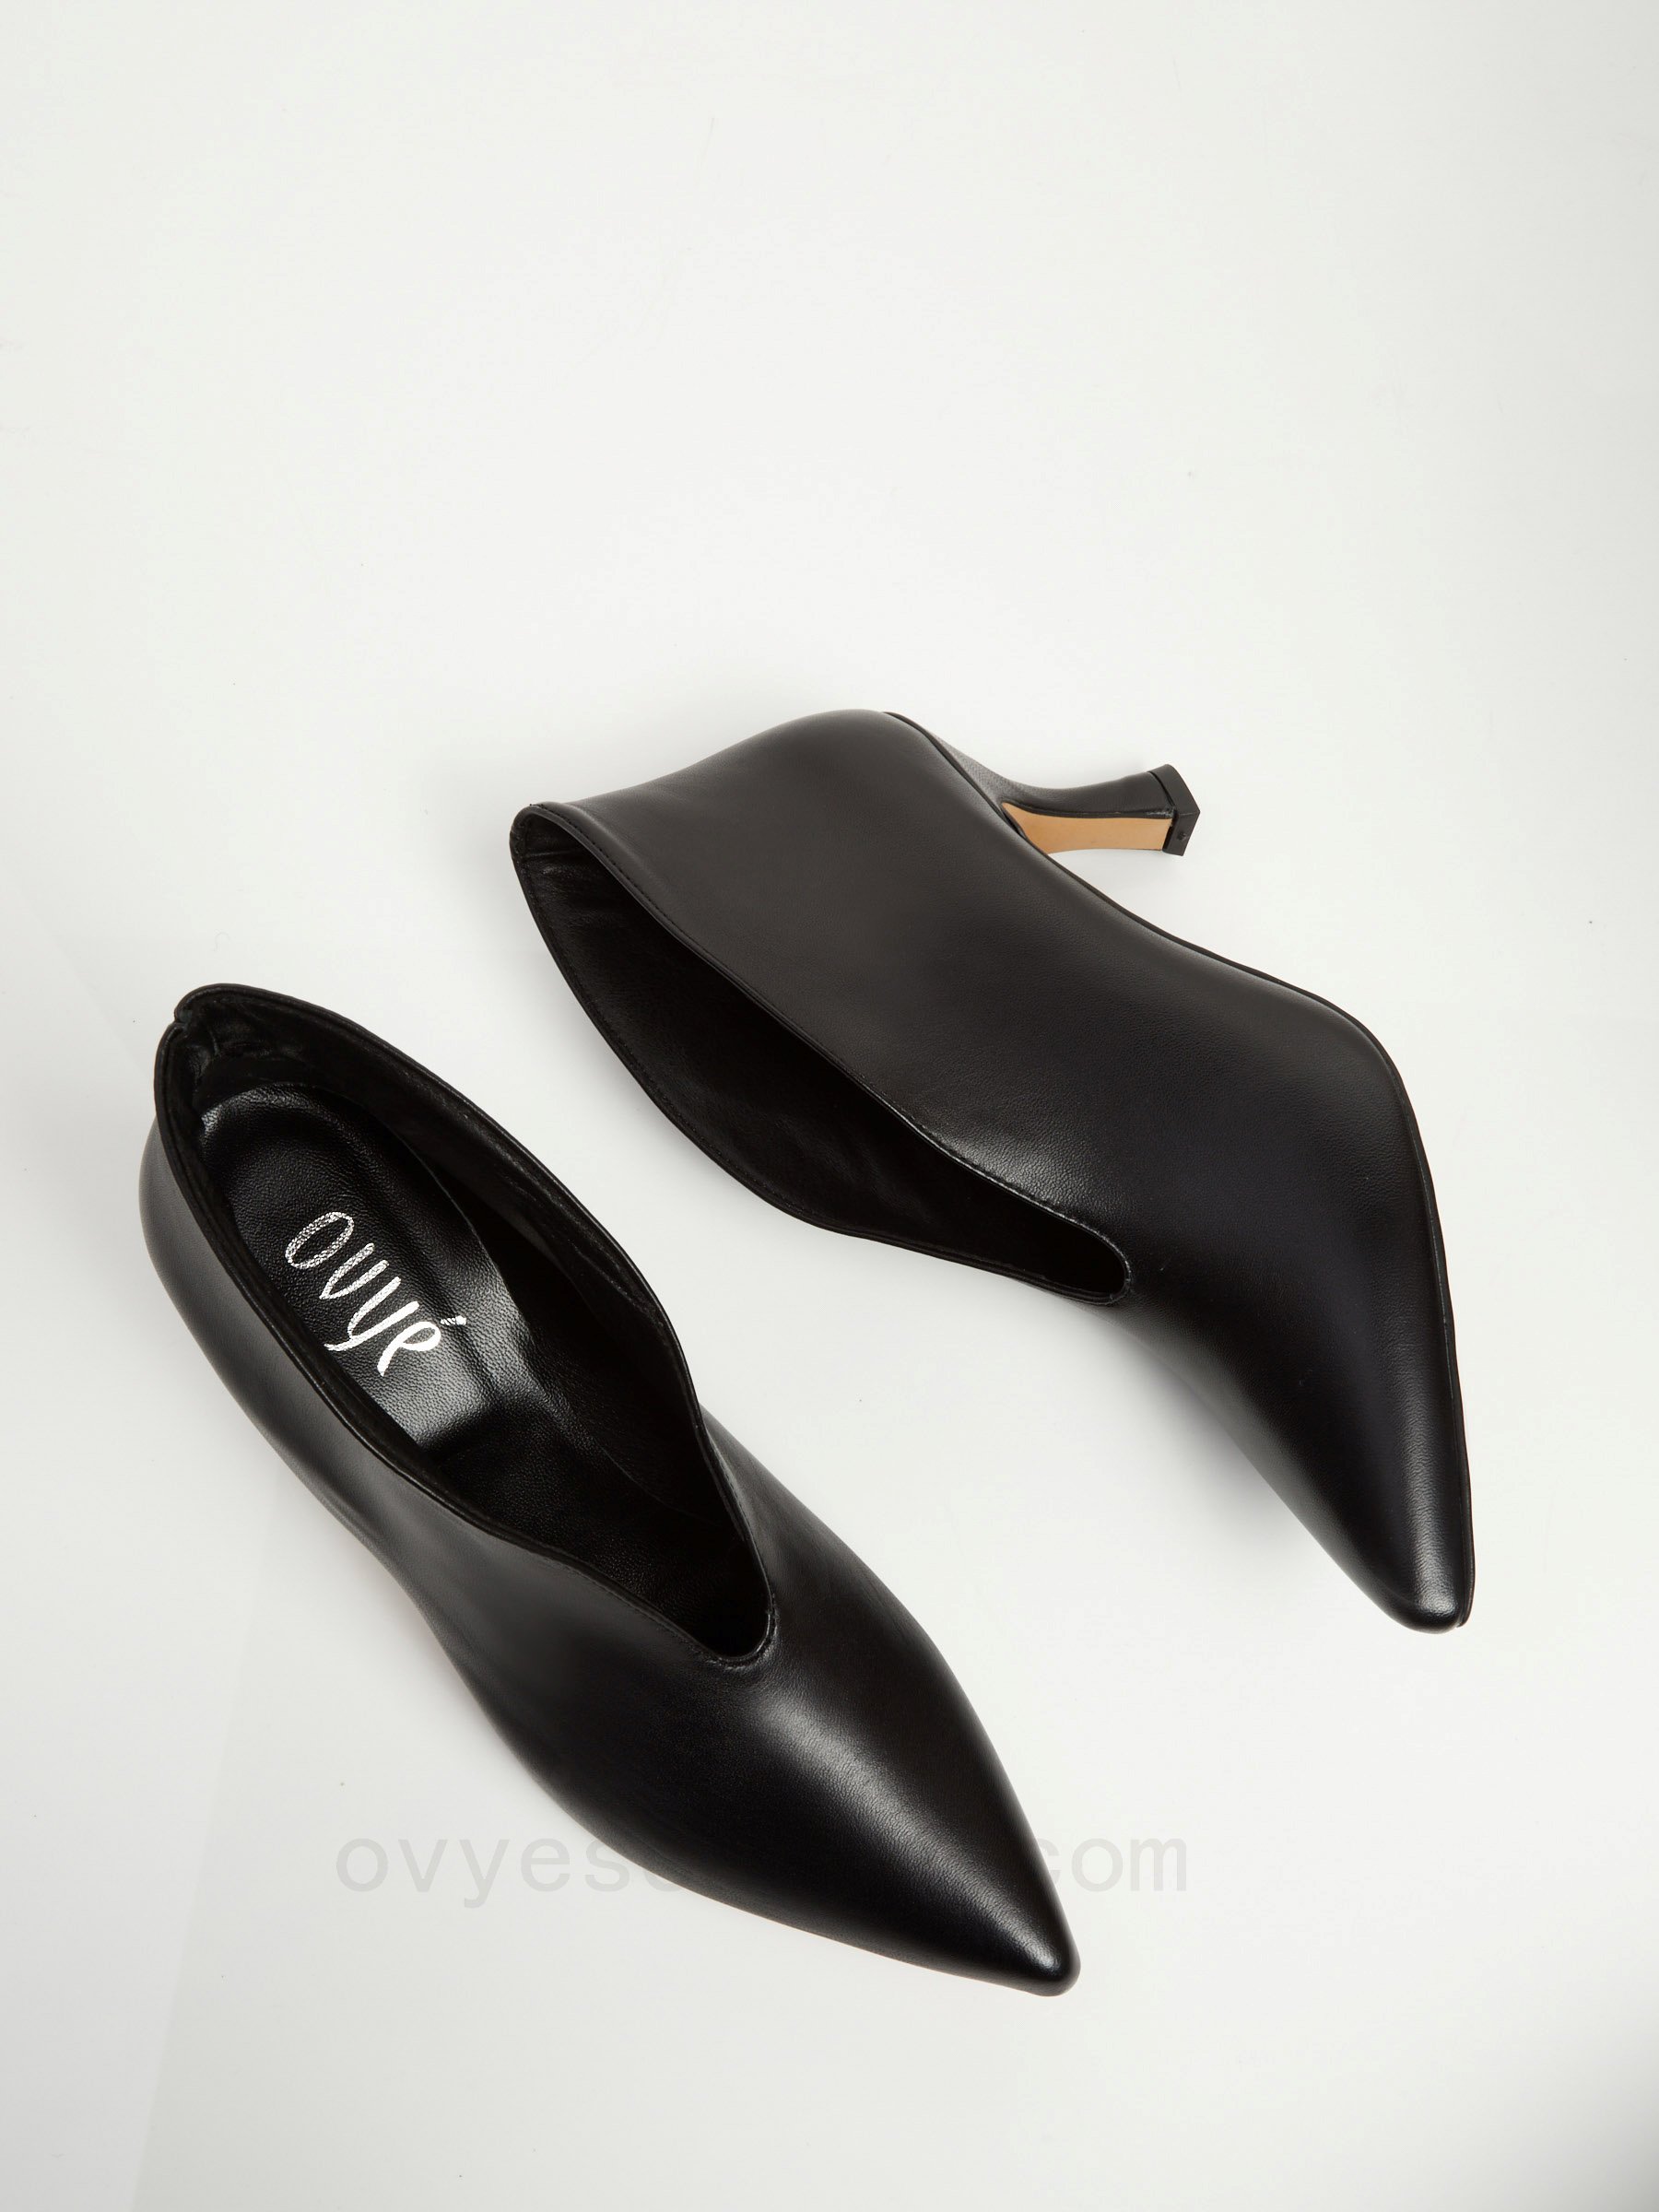 scarpe ovy&#232; outlet Leather Pumps F08161027-0419